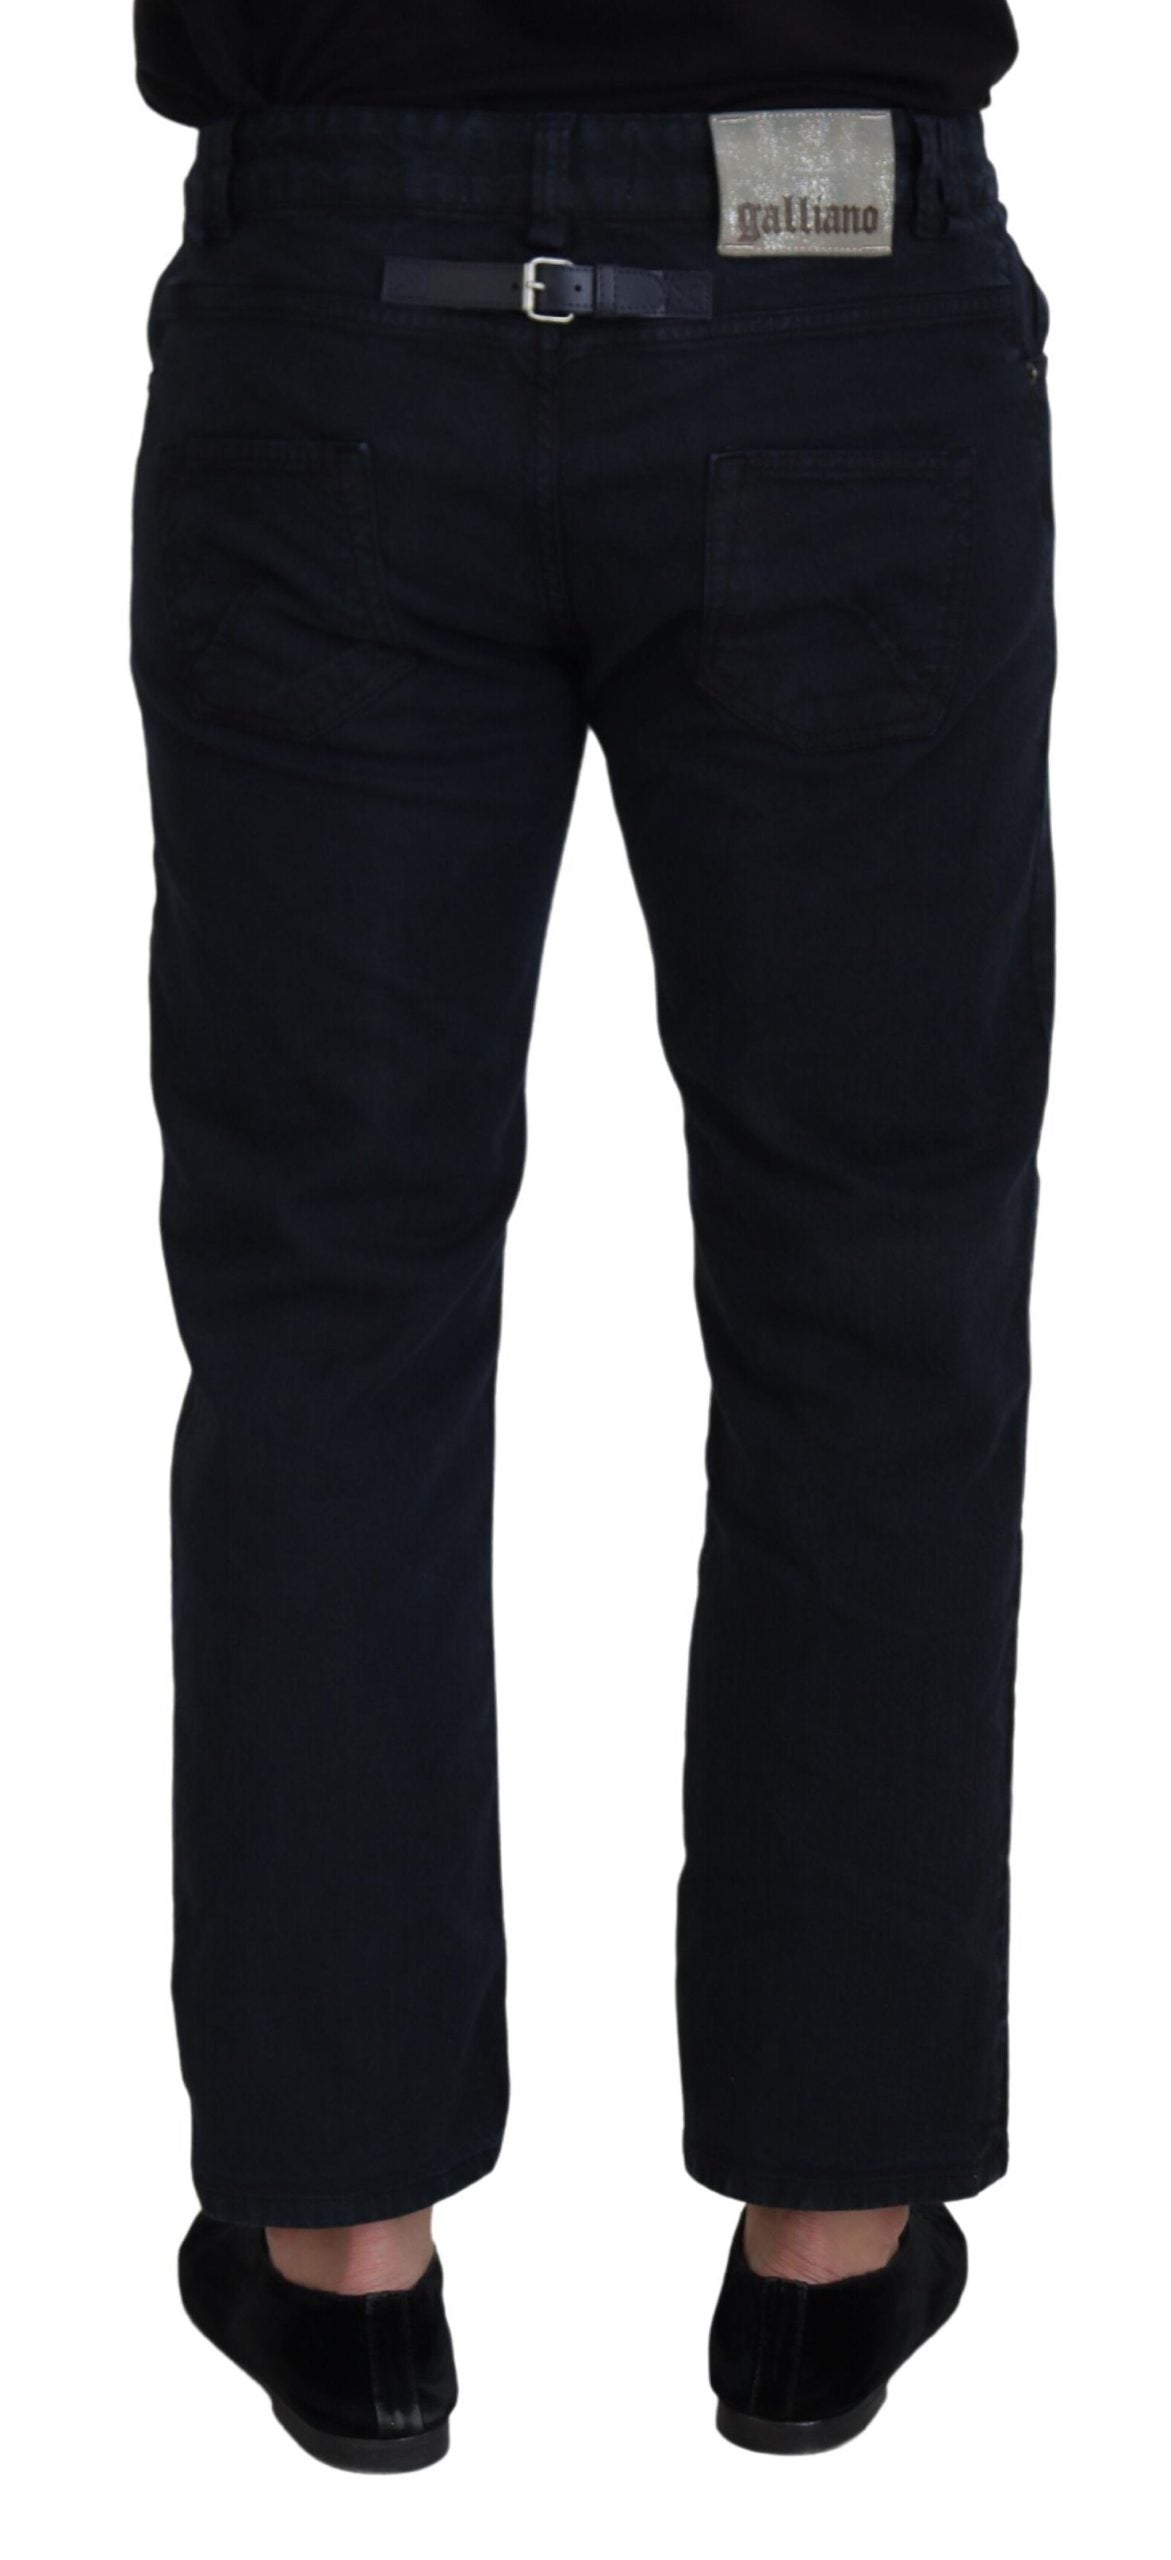 John Galliano Men's Black Cotton Back Buckle Casual Denim Jeans - Designed by John Galliano Available to Buy at a Discounted Price on Moon Behind The Hill Online Designer Discount Store